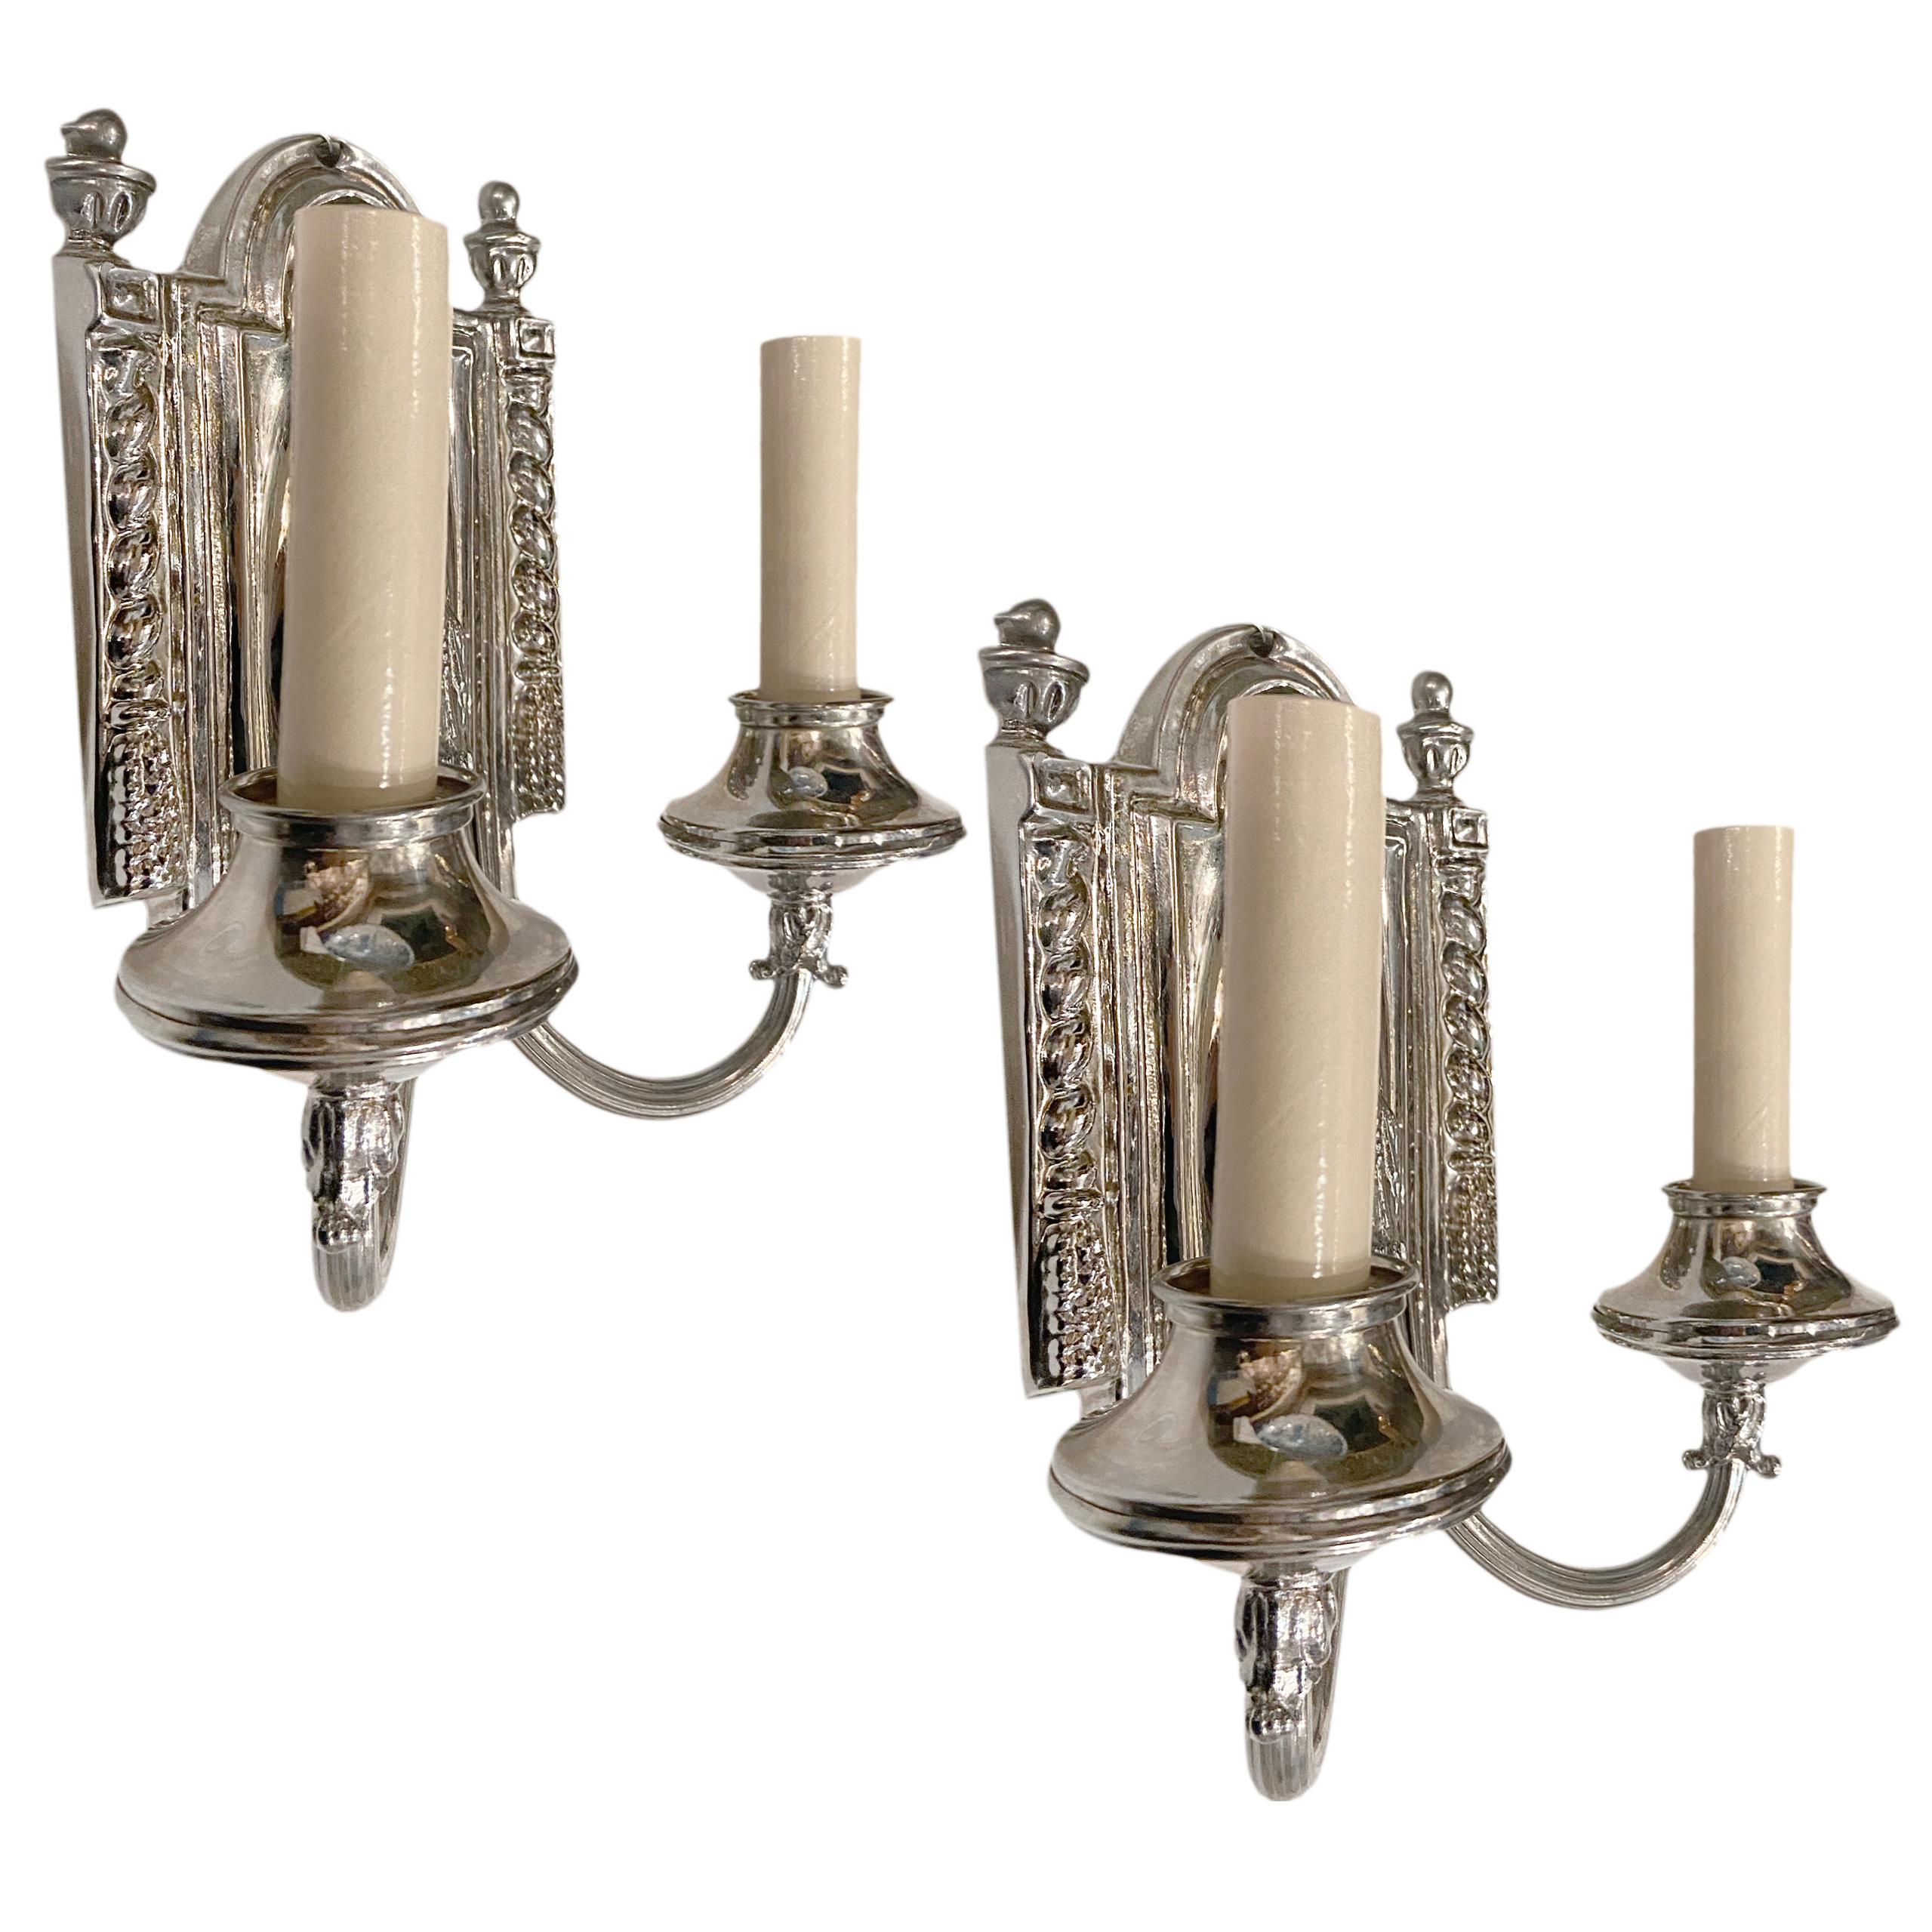 A pair of circa 1930's Italian repousse' metal sconces. 

Measurements:
Height: 8